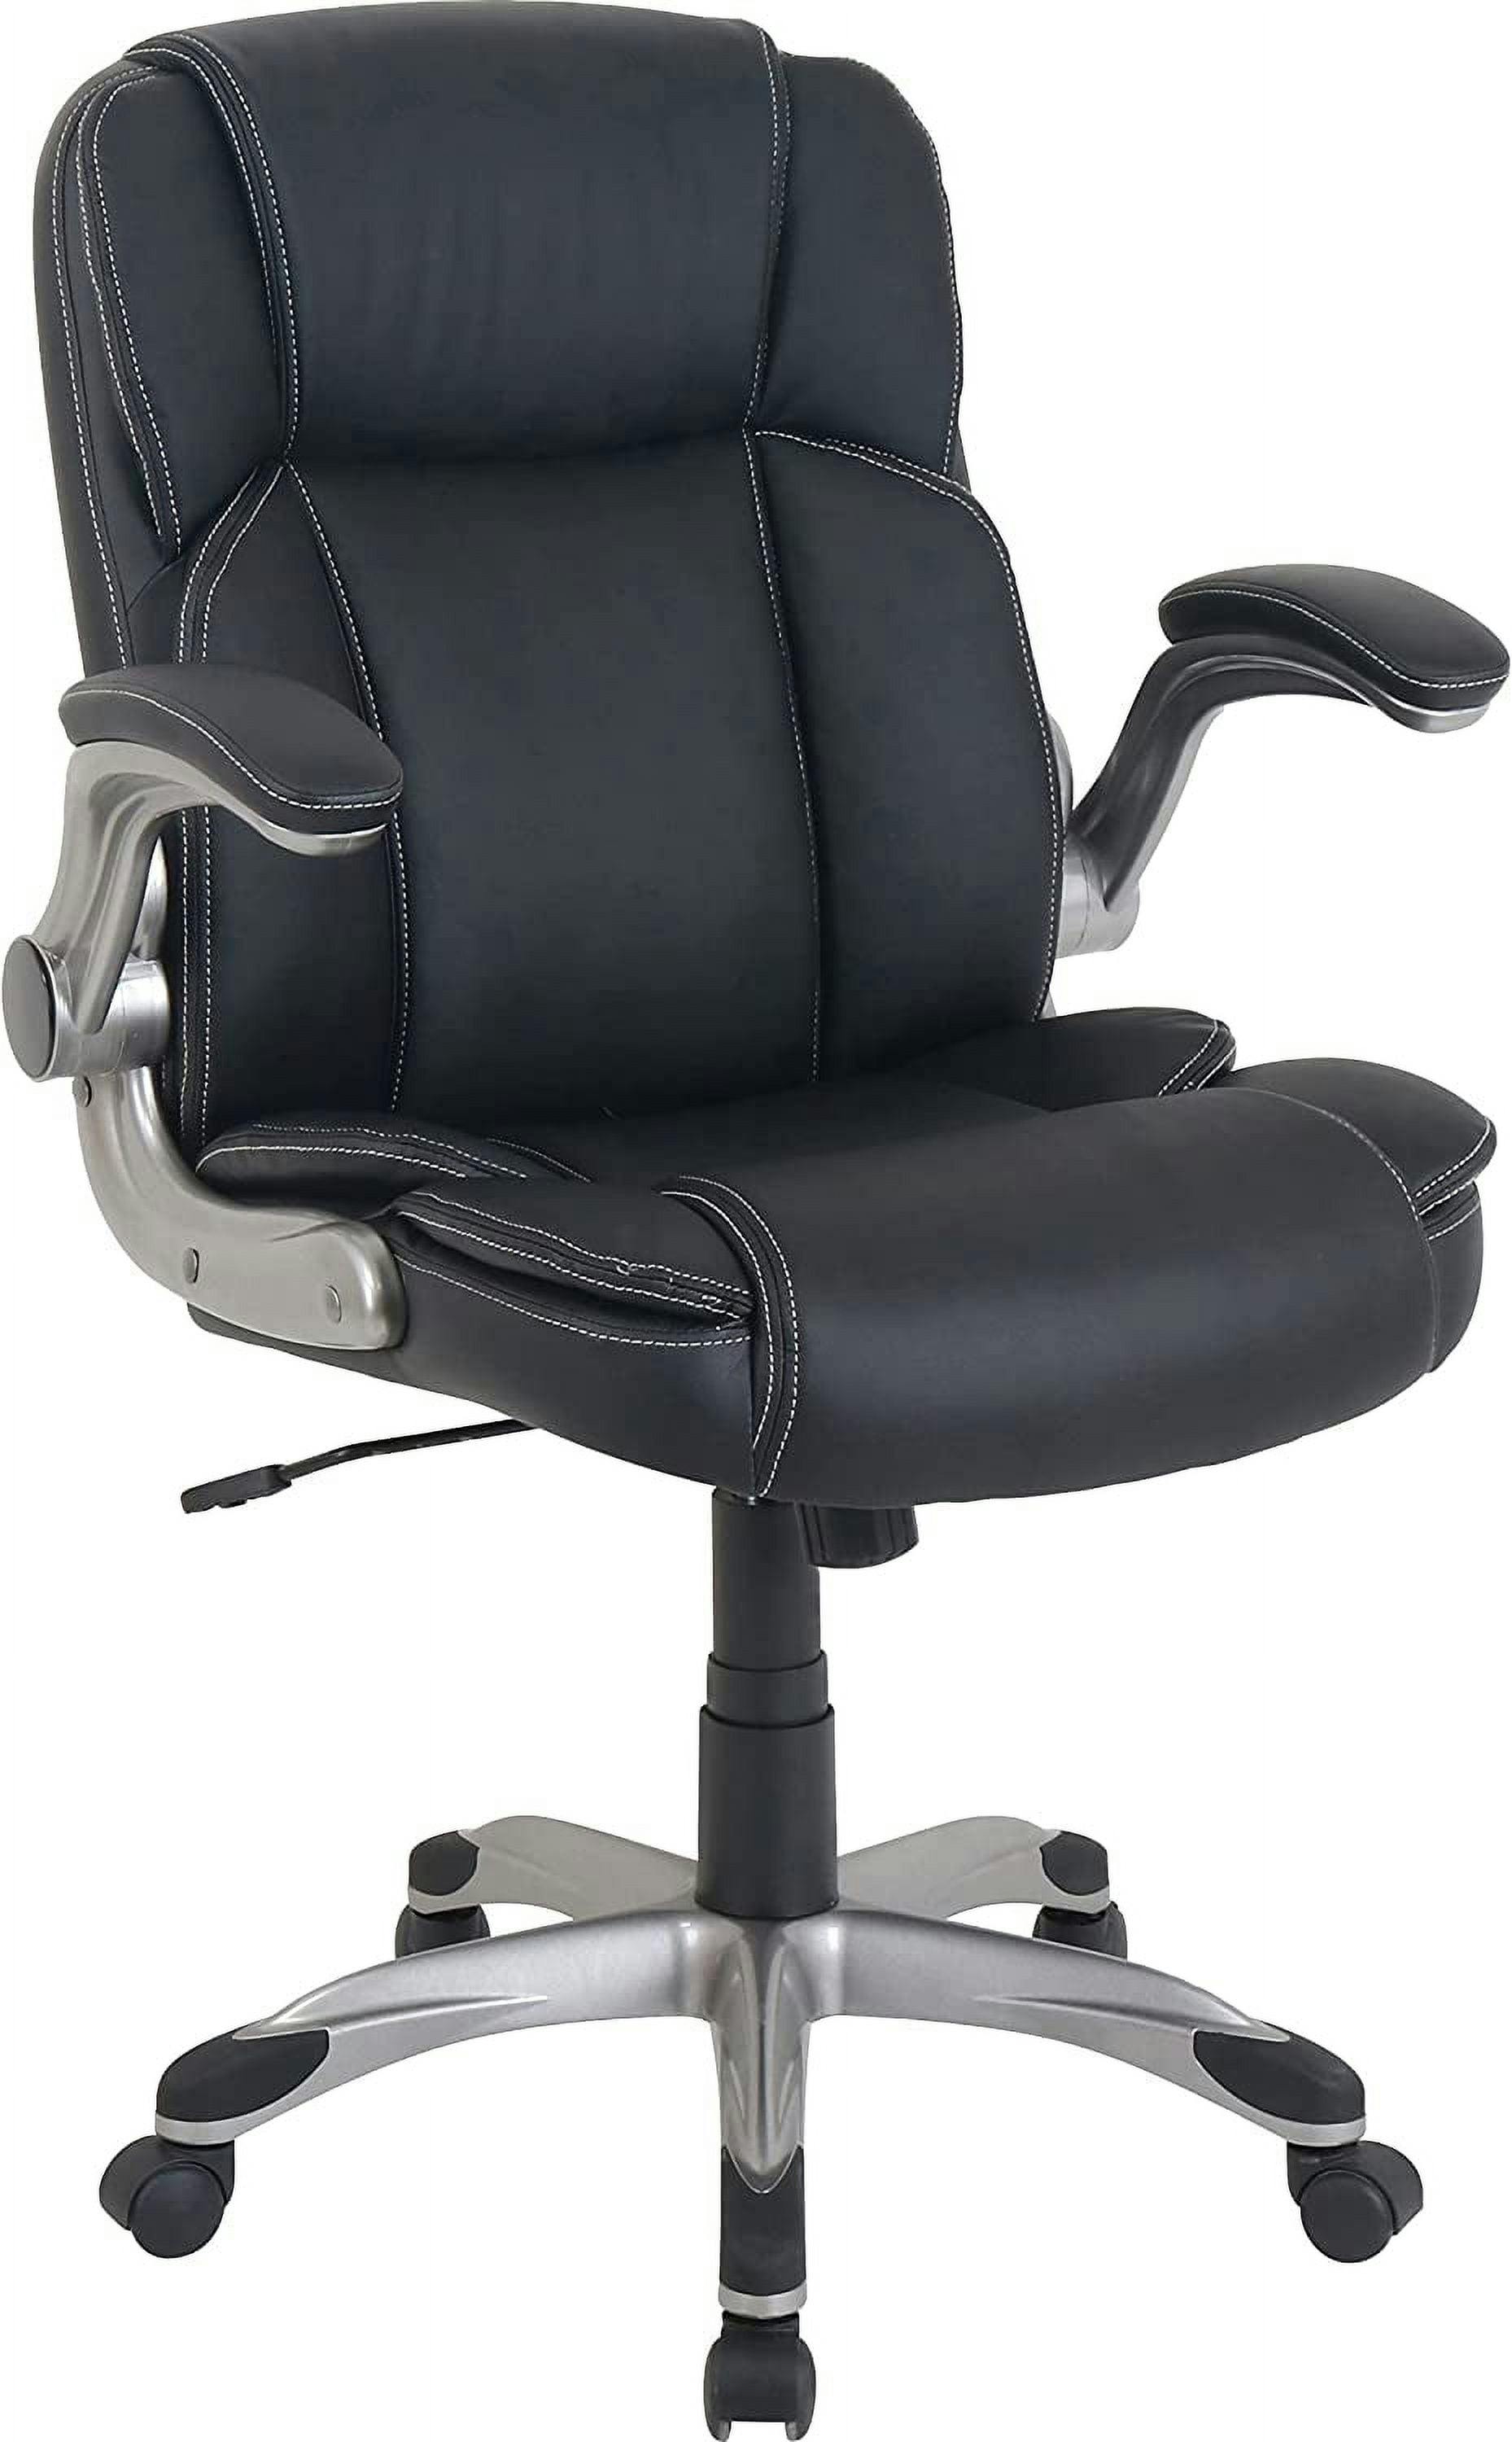 Sleek Stitched Mid-Back Executive Leather Swivel Chair with Adjustable Arms